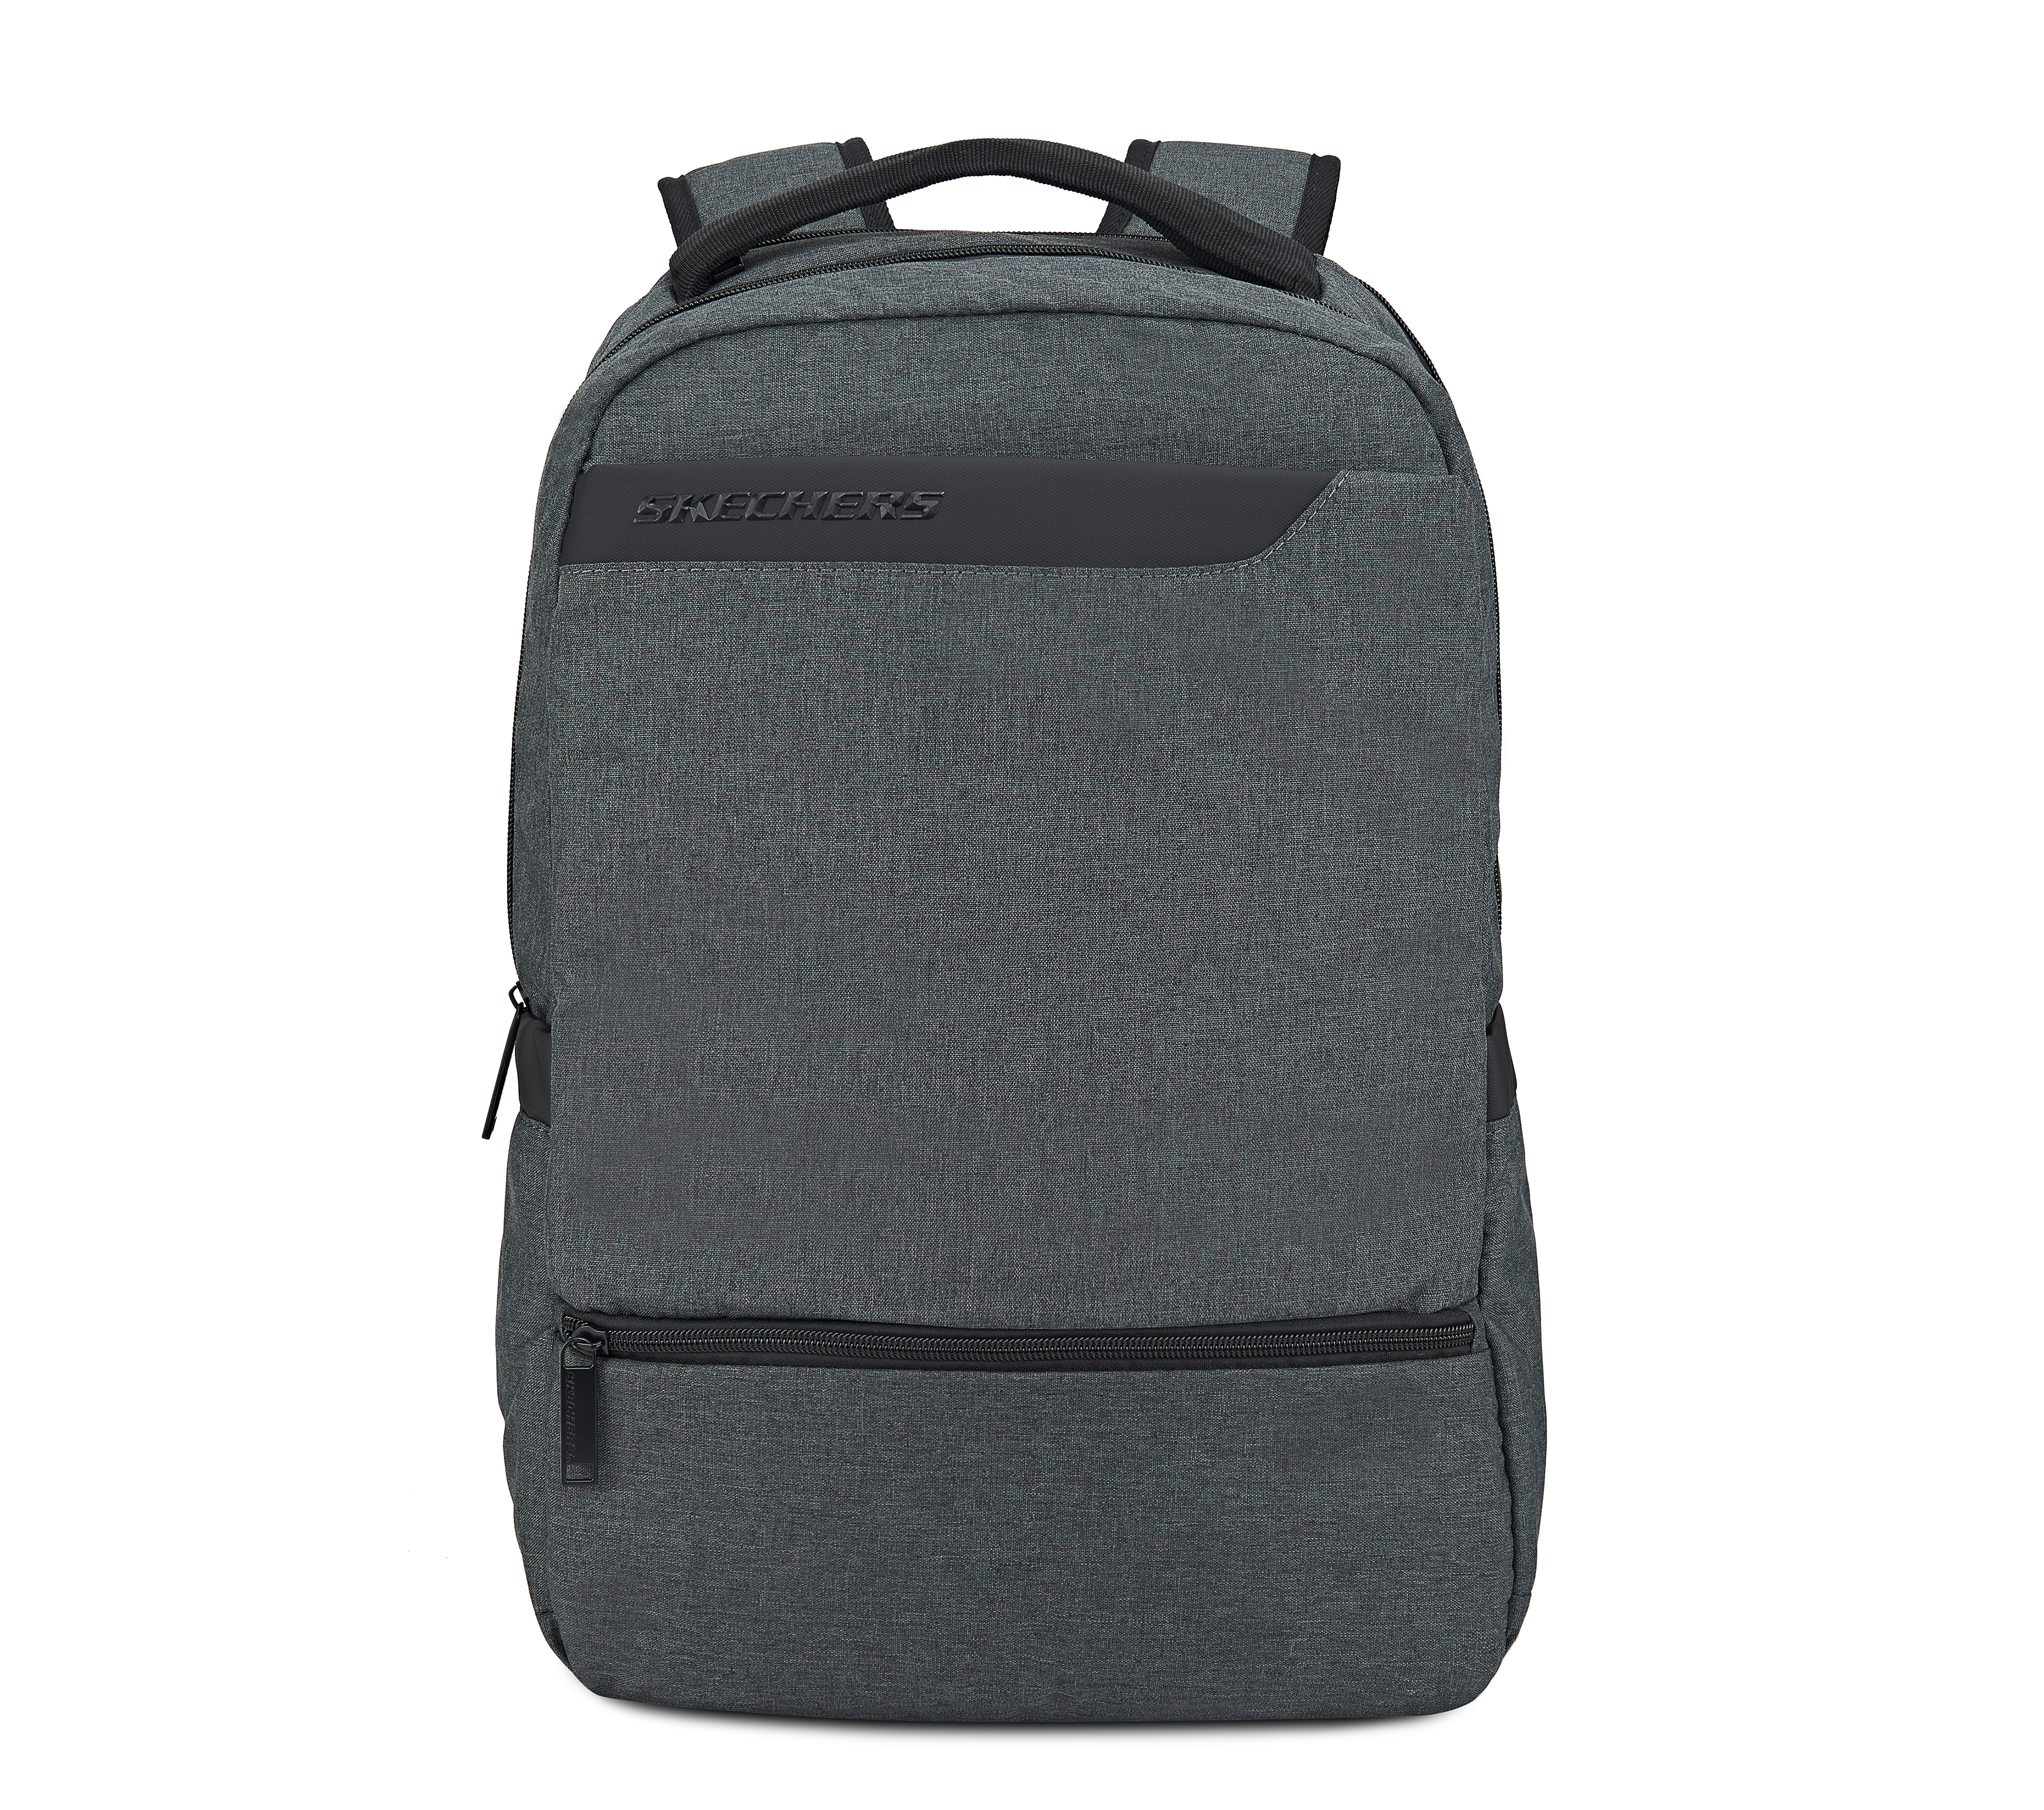 BACKPACK, DARK GREY Accessories Lateral View